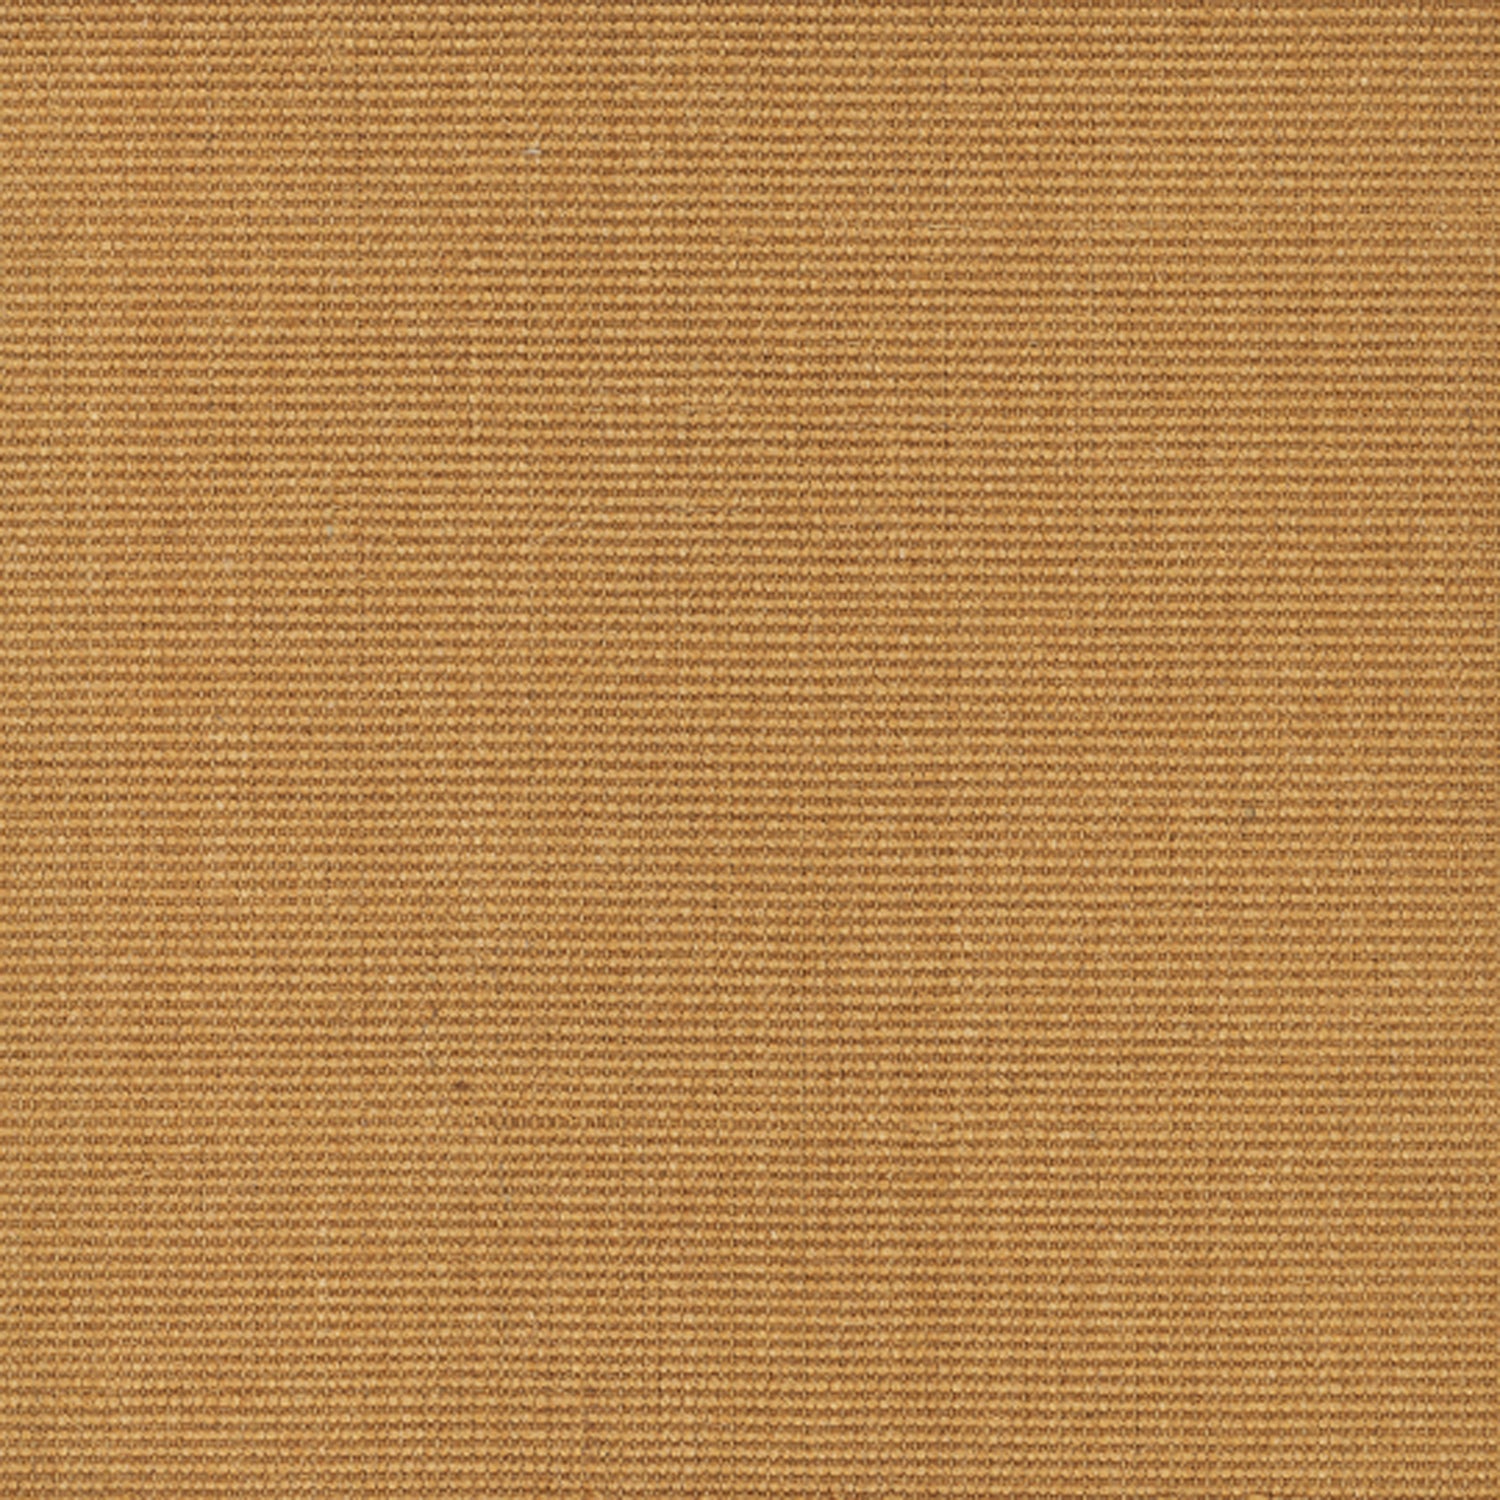 Sisal broadloom carpet swatch in a ribbed weave in "Select" gold.